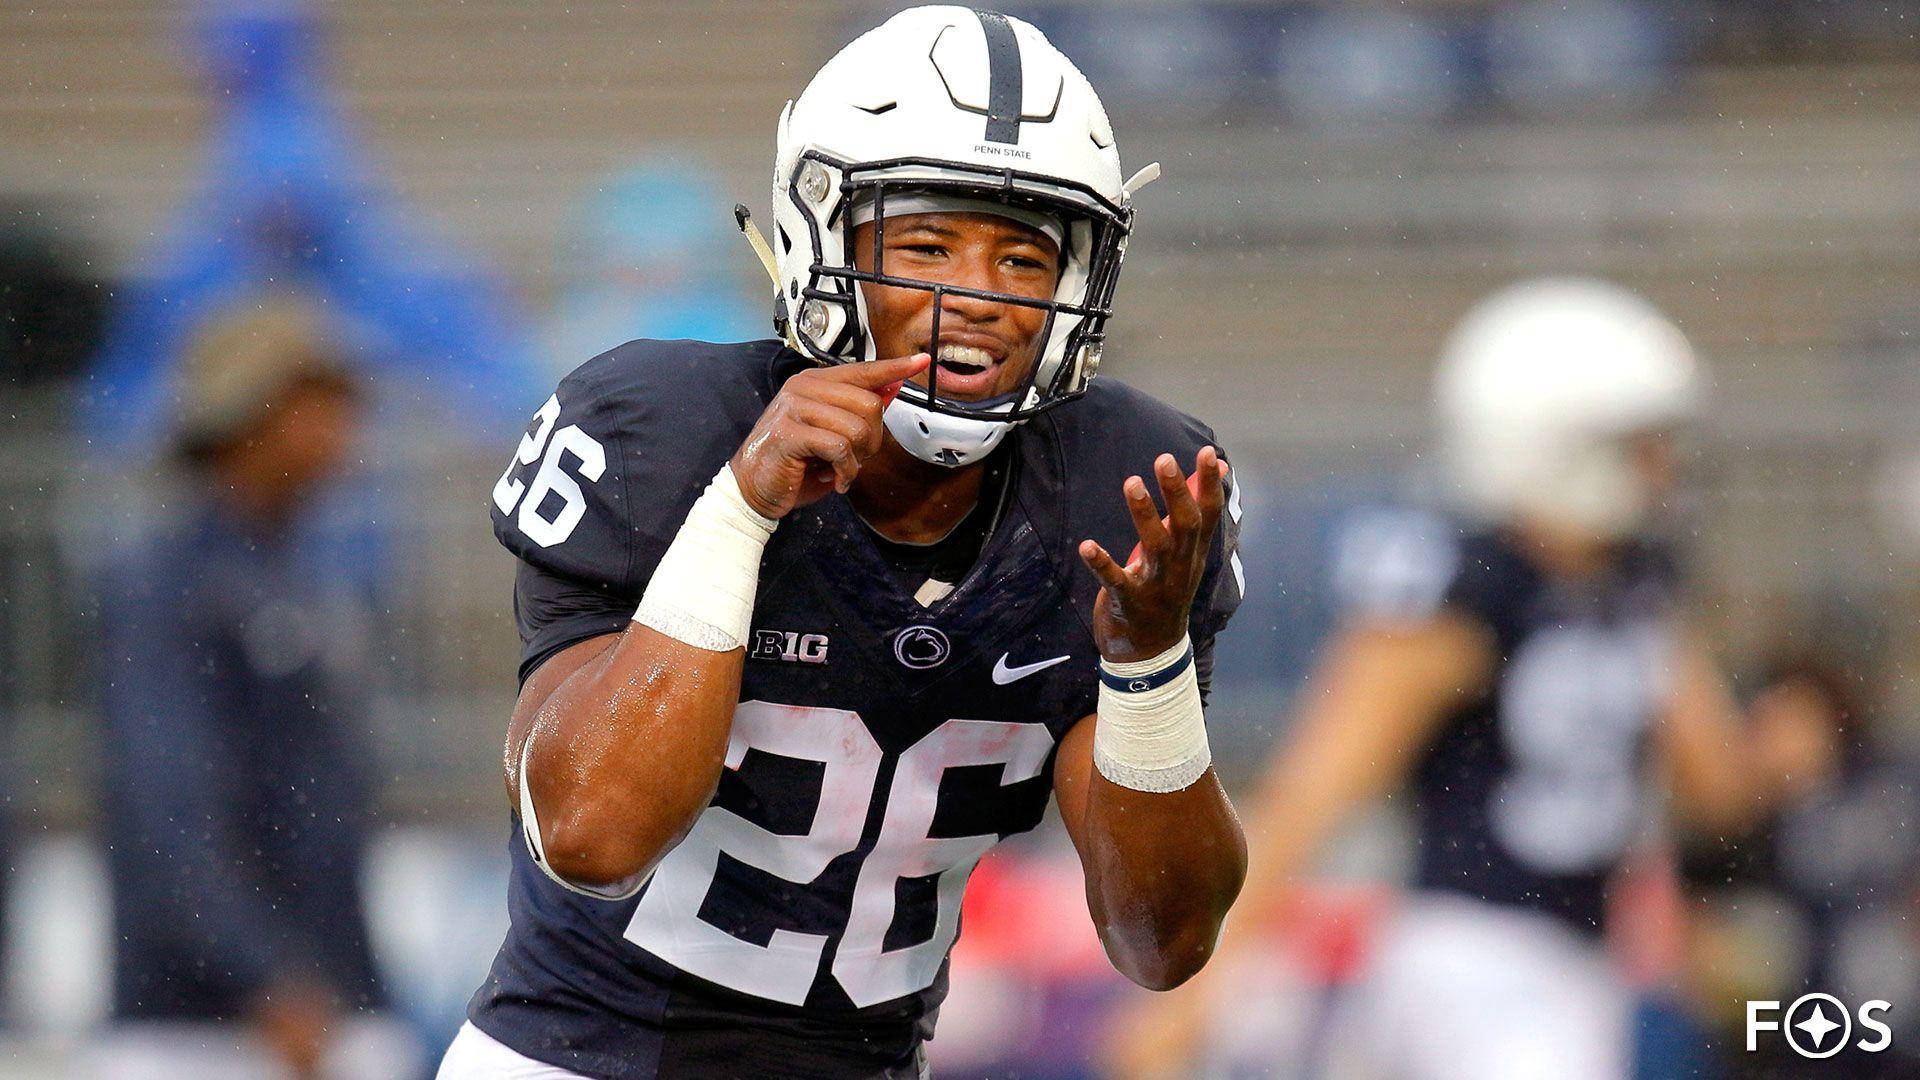 Nfl Star Saquon Barkley Running For The End Zone Background